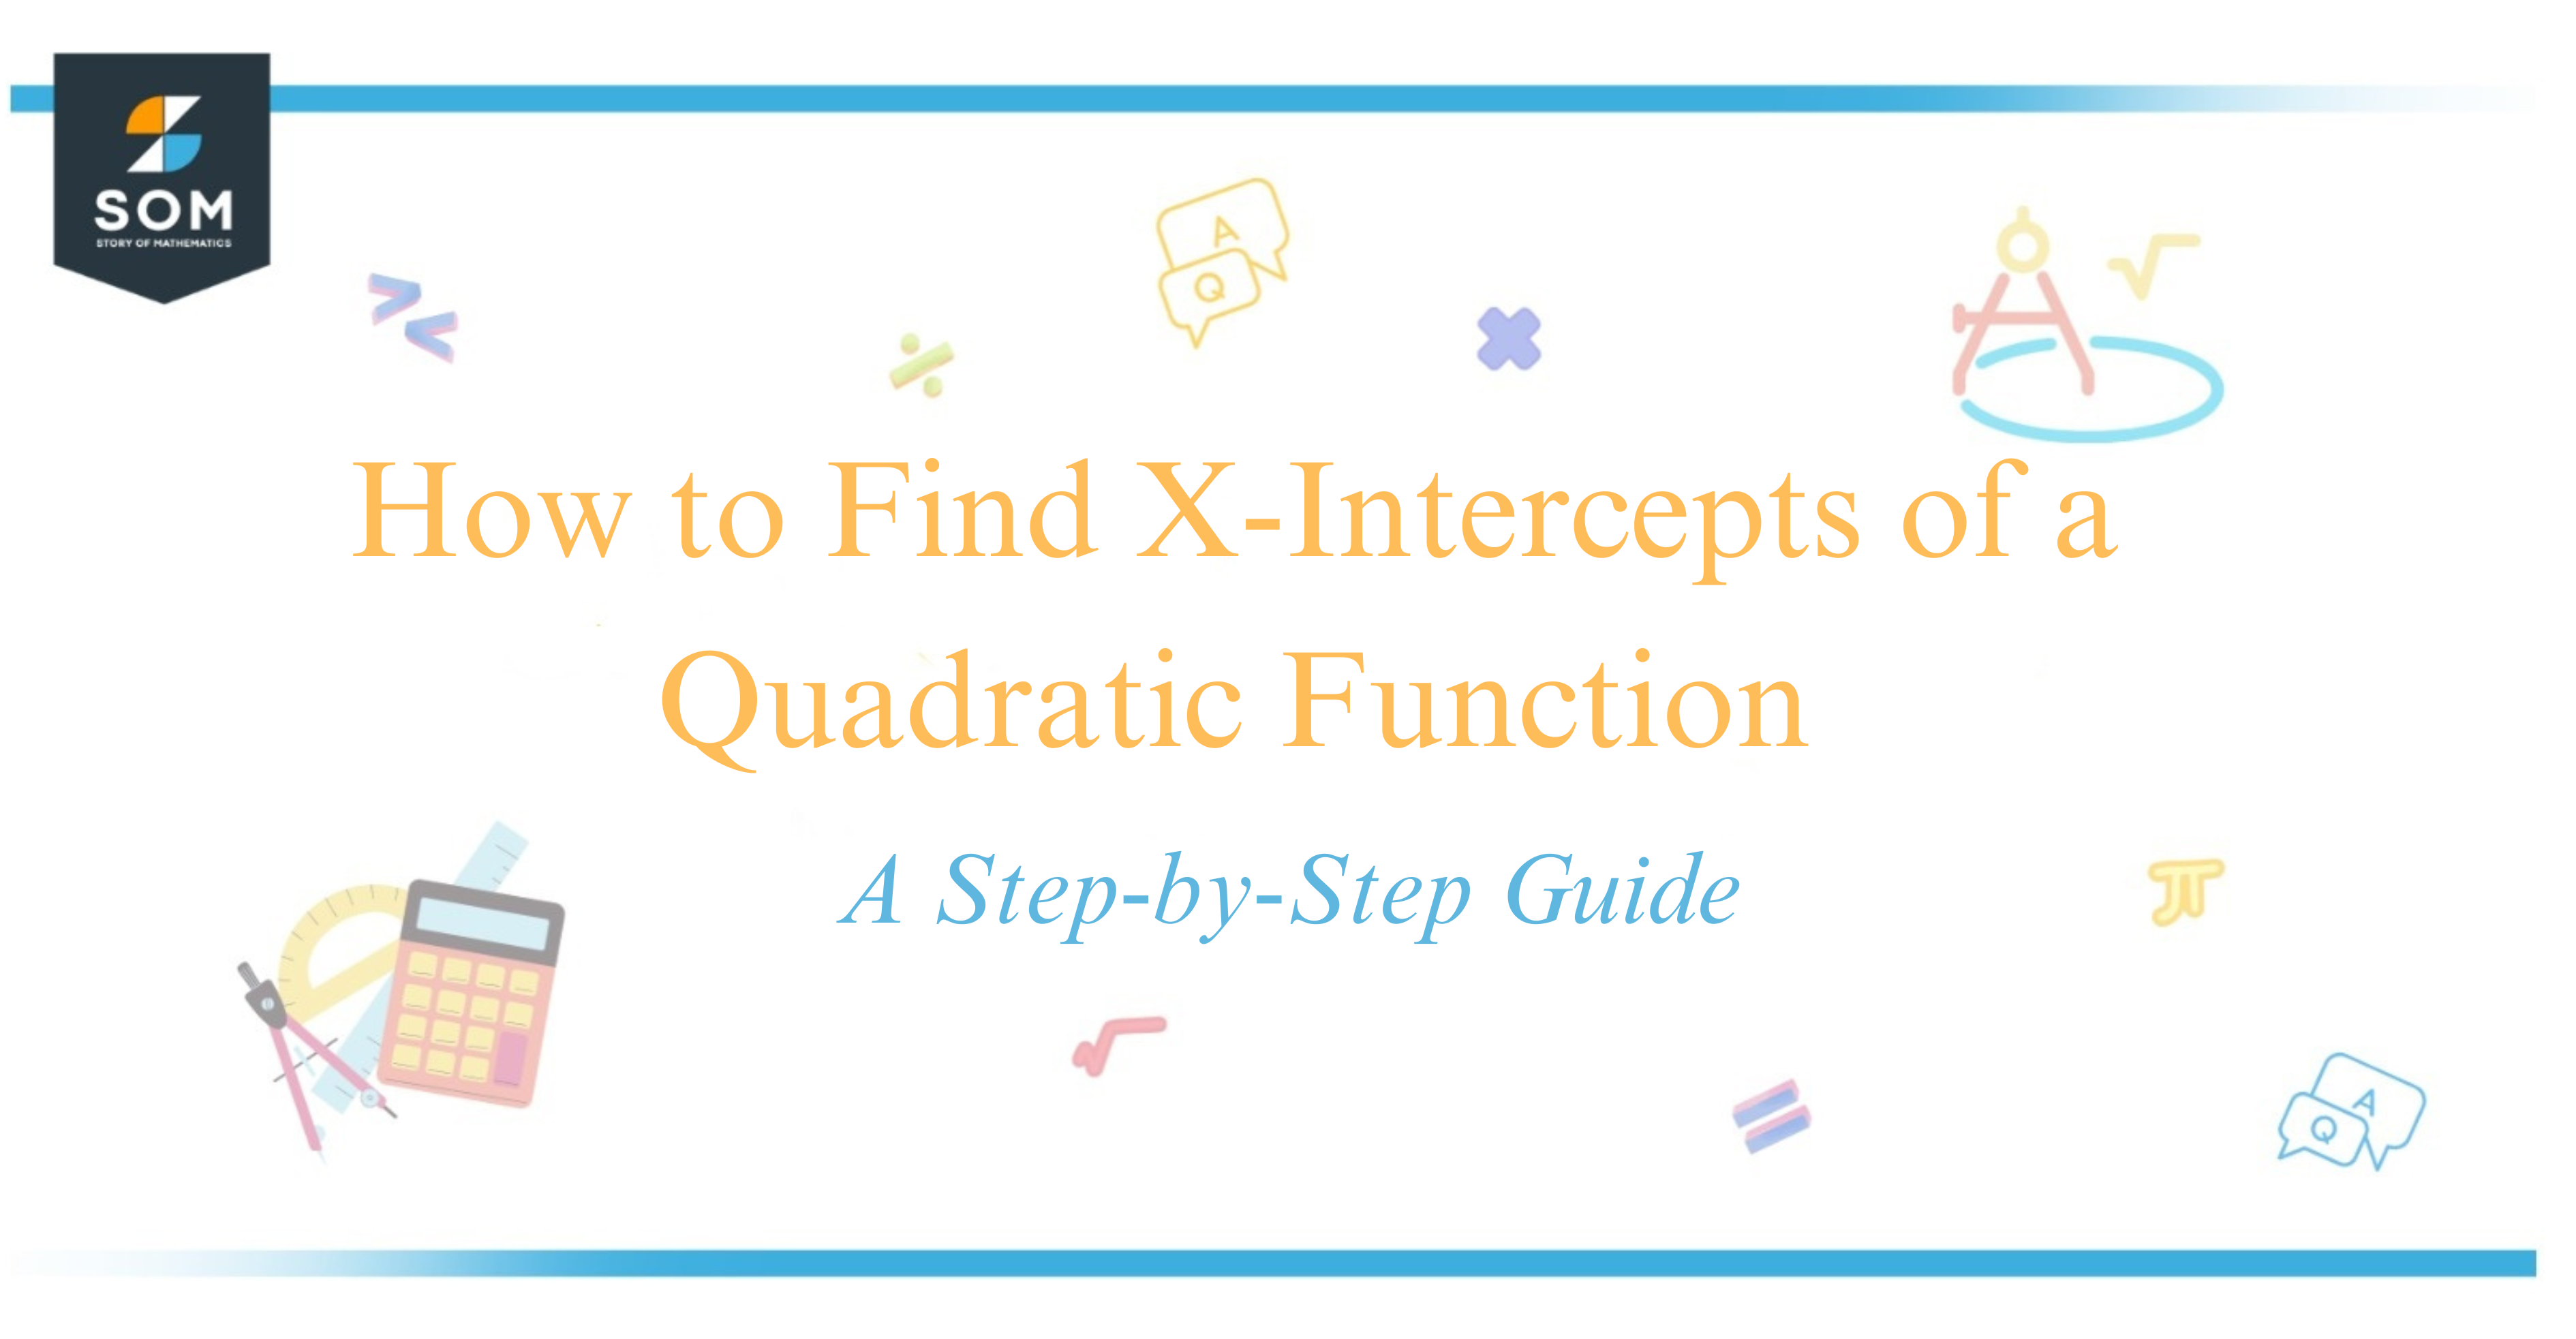 How to Find X-Intercepts of a Quadratic Function A Step-by-Step Guide